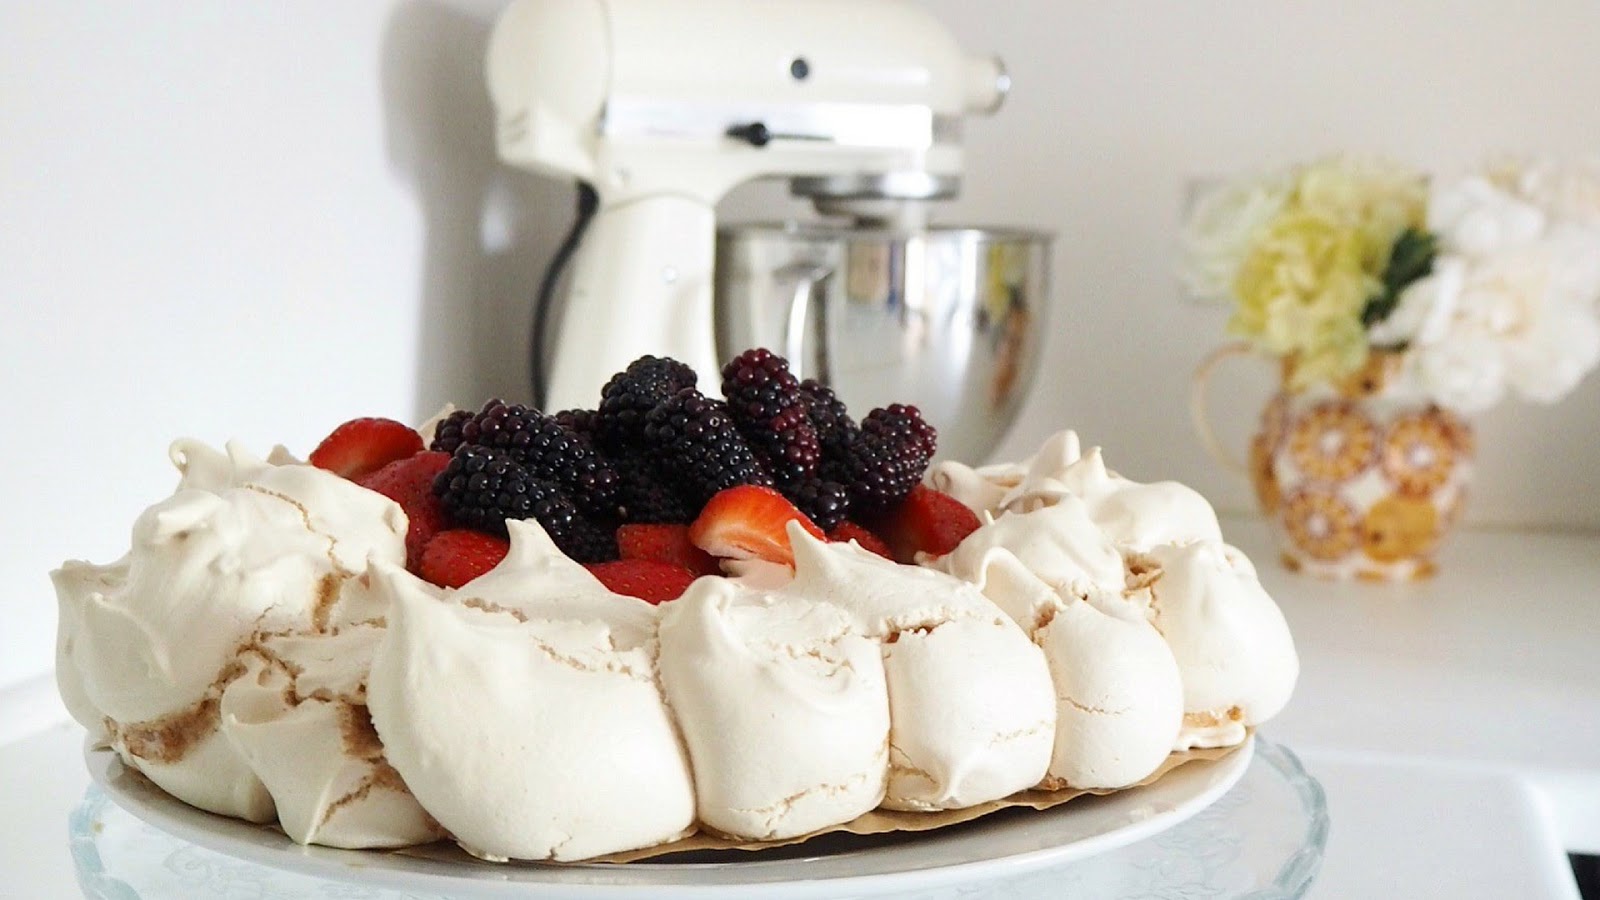 Best easy meringue recipe, how to get egg whites to stiffen to create an easy to make meringue summer pavlova. Make sure you whisk the egg whites for a long time, you can't overwhisk. Add the sugar slowly and keep whisking.